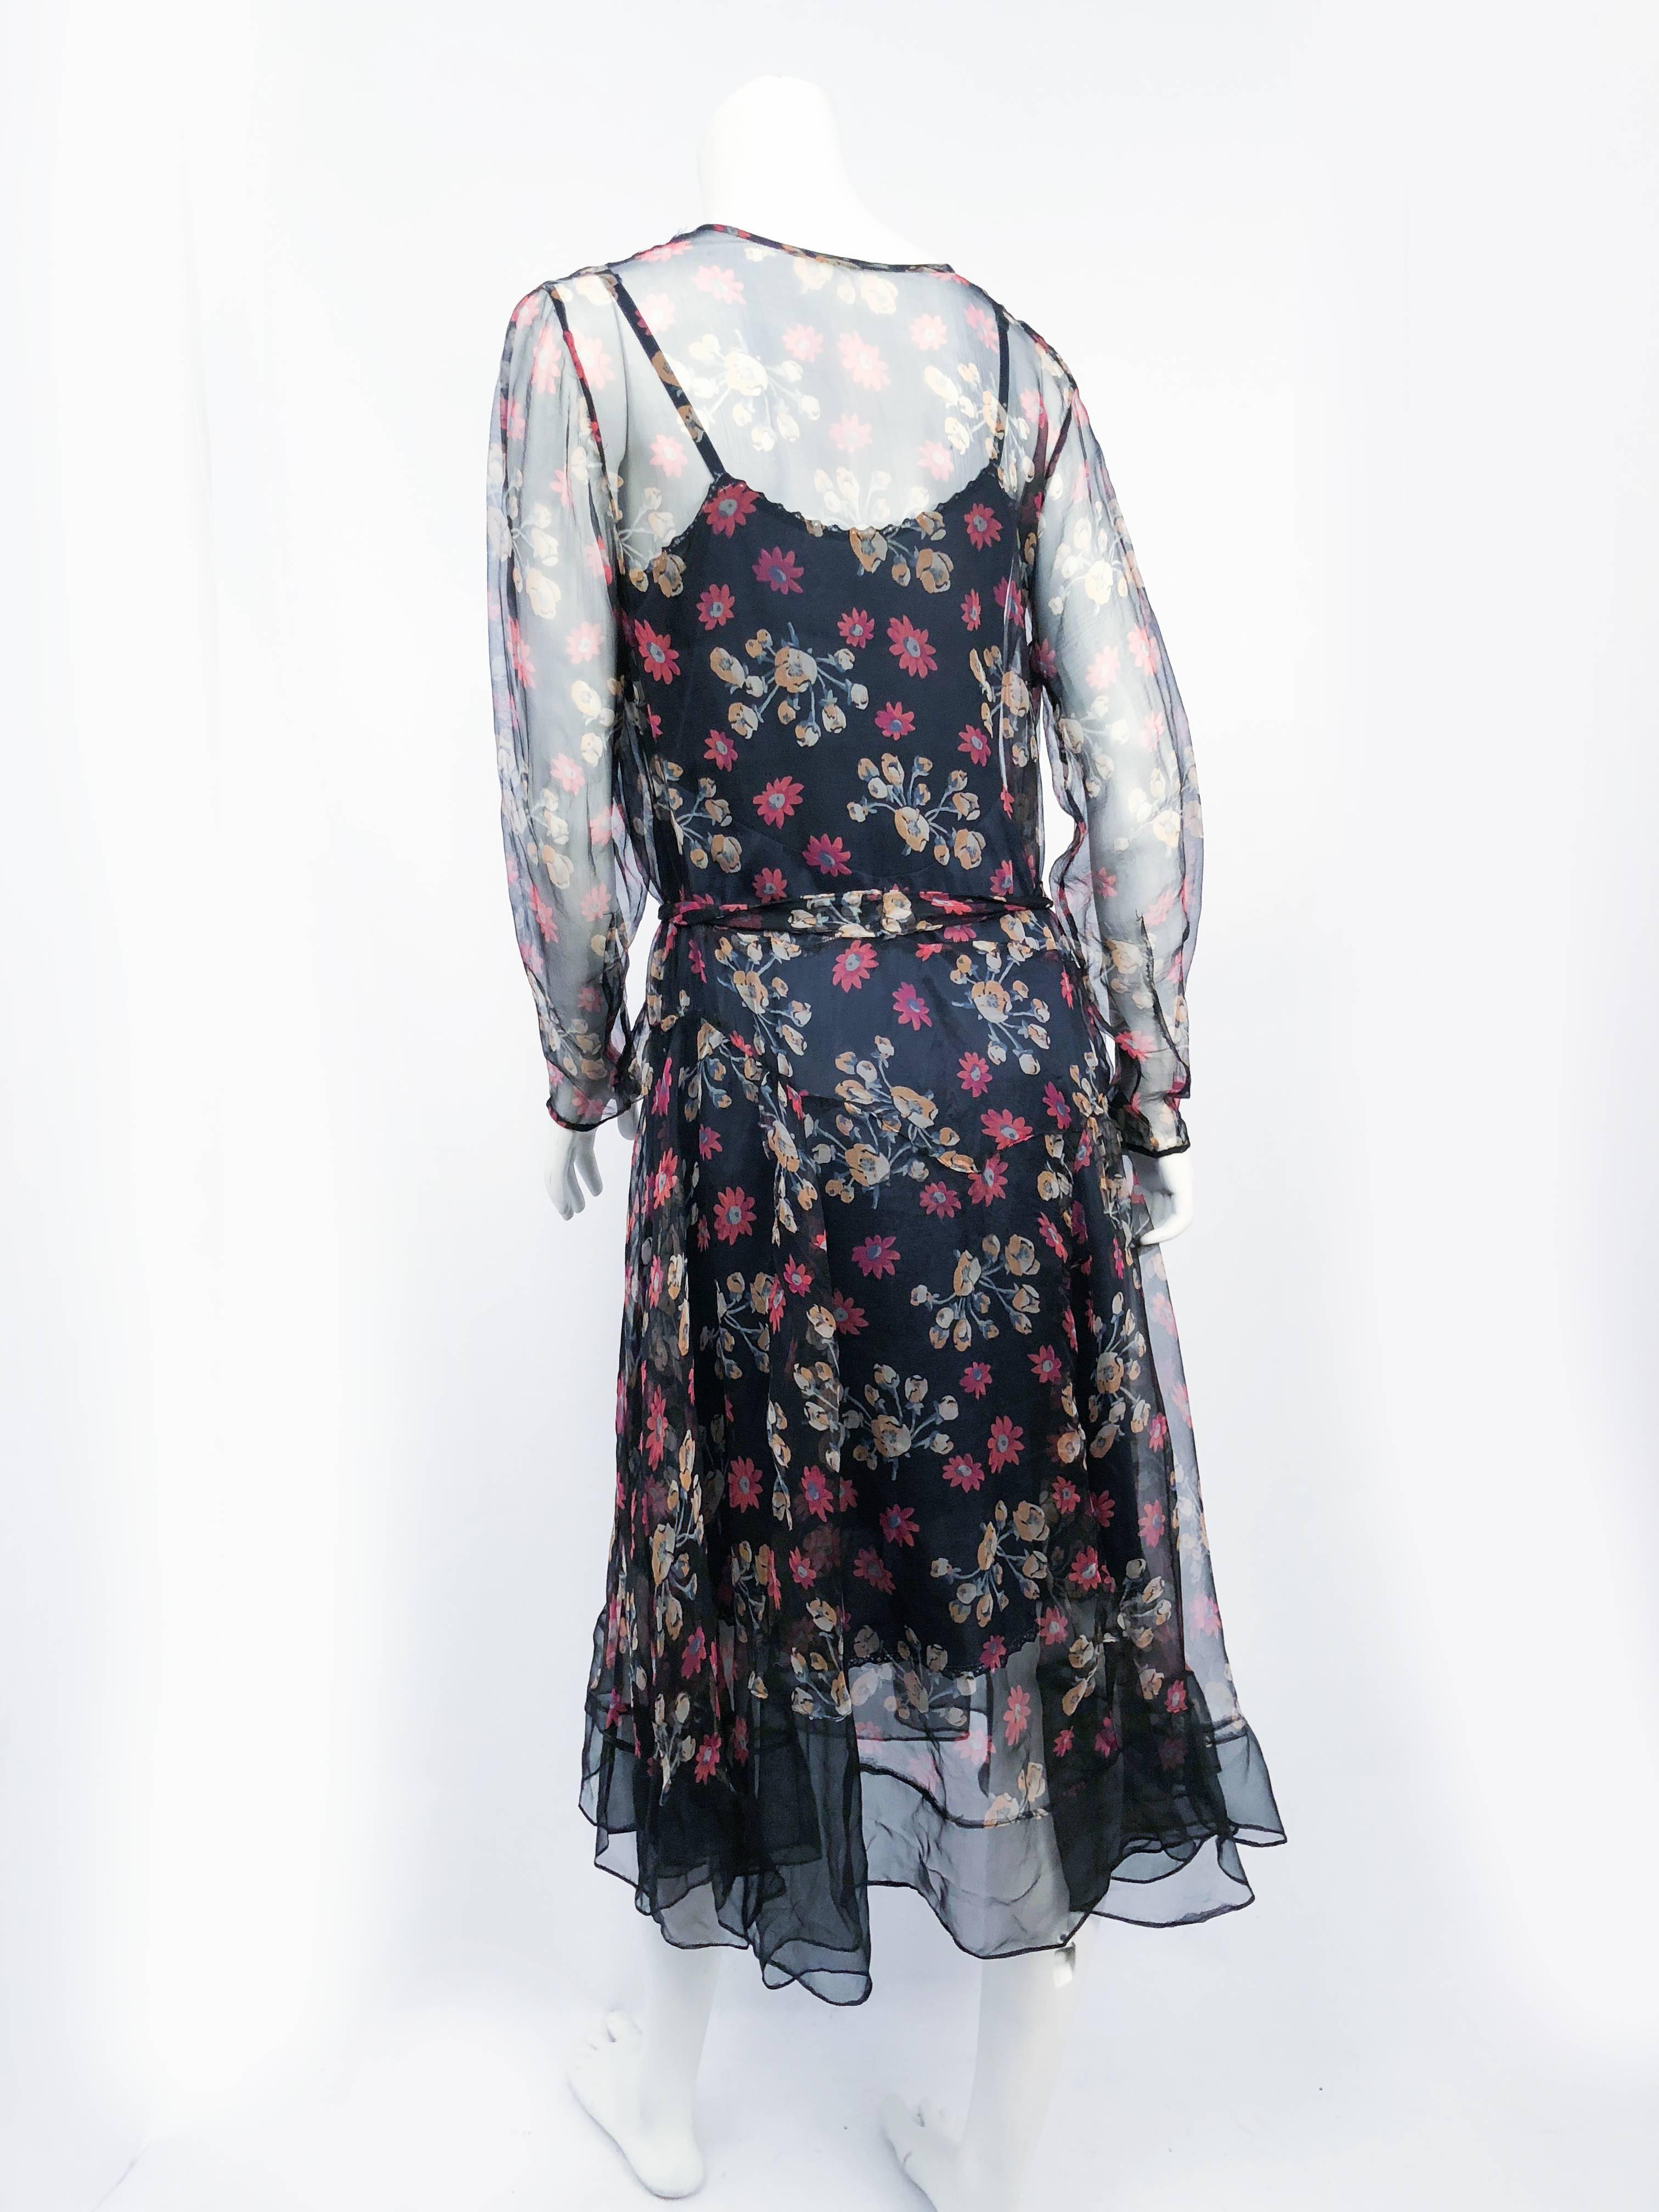 1920s Sheer Floral Printed Silk Chiffon Dress. Sheer floral printed silk chiffon dress with black background color. Full length tapered sleeves and drop-waist. Matching head sash. Hemmed with sheer black ruffling and goring in the skirt for extra